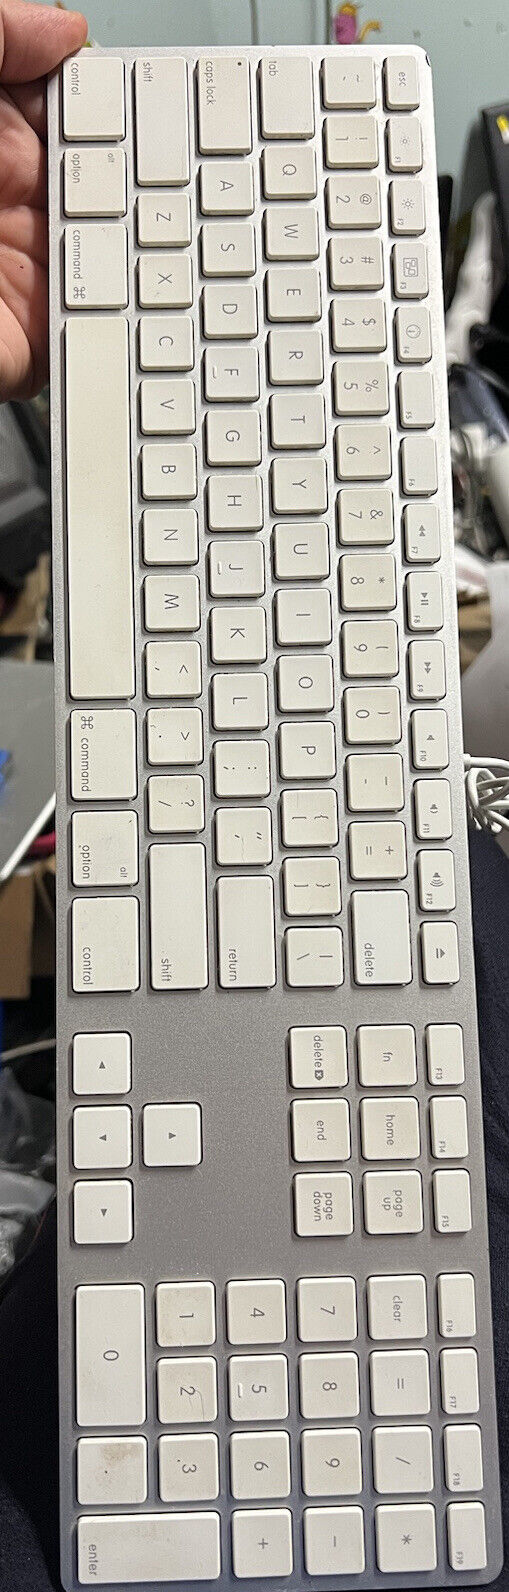 Apple Wire Keyboard With Numeric Keypad A1243 - preowned and tested